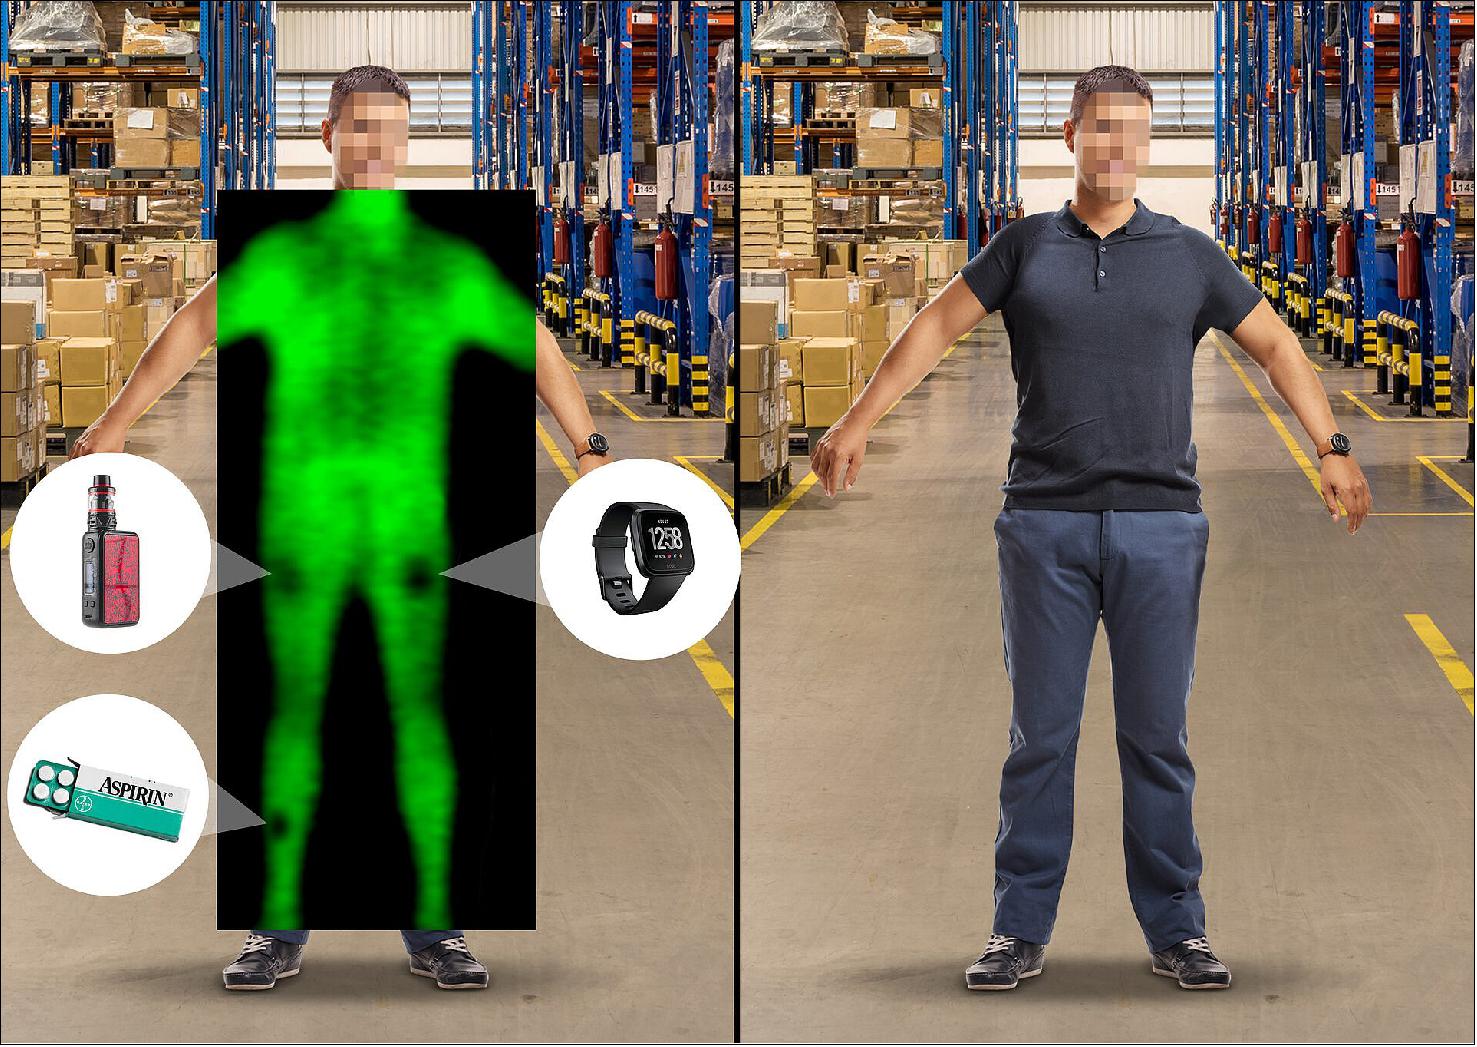 Figure 2: Terahertz imaging to spot concealed items under clothes. The global logistics and supply chain industry represents a focus of interest for passive terahertz screening, co-patented by ESA and marketed by ThruVision. The massive distribution centers that serve the fast-growing e-commerce sector, staffed by thousands of employees, have proved attractive targets for theft by organized crime and individuals. Traditionally such centers perform randomized employee patdowns using portable metal detectors, which are intrusive, unpopular and thanks to the COVID-19 pandemic, unsanitary. They are also ineffective, being unable to detect non-metallic objects. Instead SONY Digital Audio Disc Corporation, the manufacturing logistics arm of SONY Corporation has begun using the passive terahertz system to routinely screen all its distribution centre workers. Operating from a distance of 3 m away, the technology can even detect very small metallic and non-metallic objects, such as CDs, cell phones or USB drives (image credit: ThruVision)